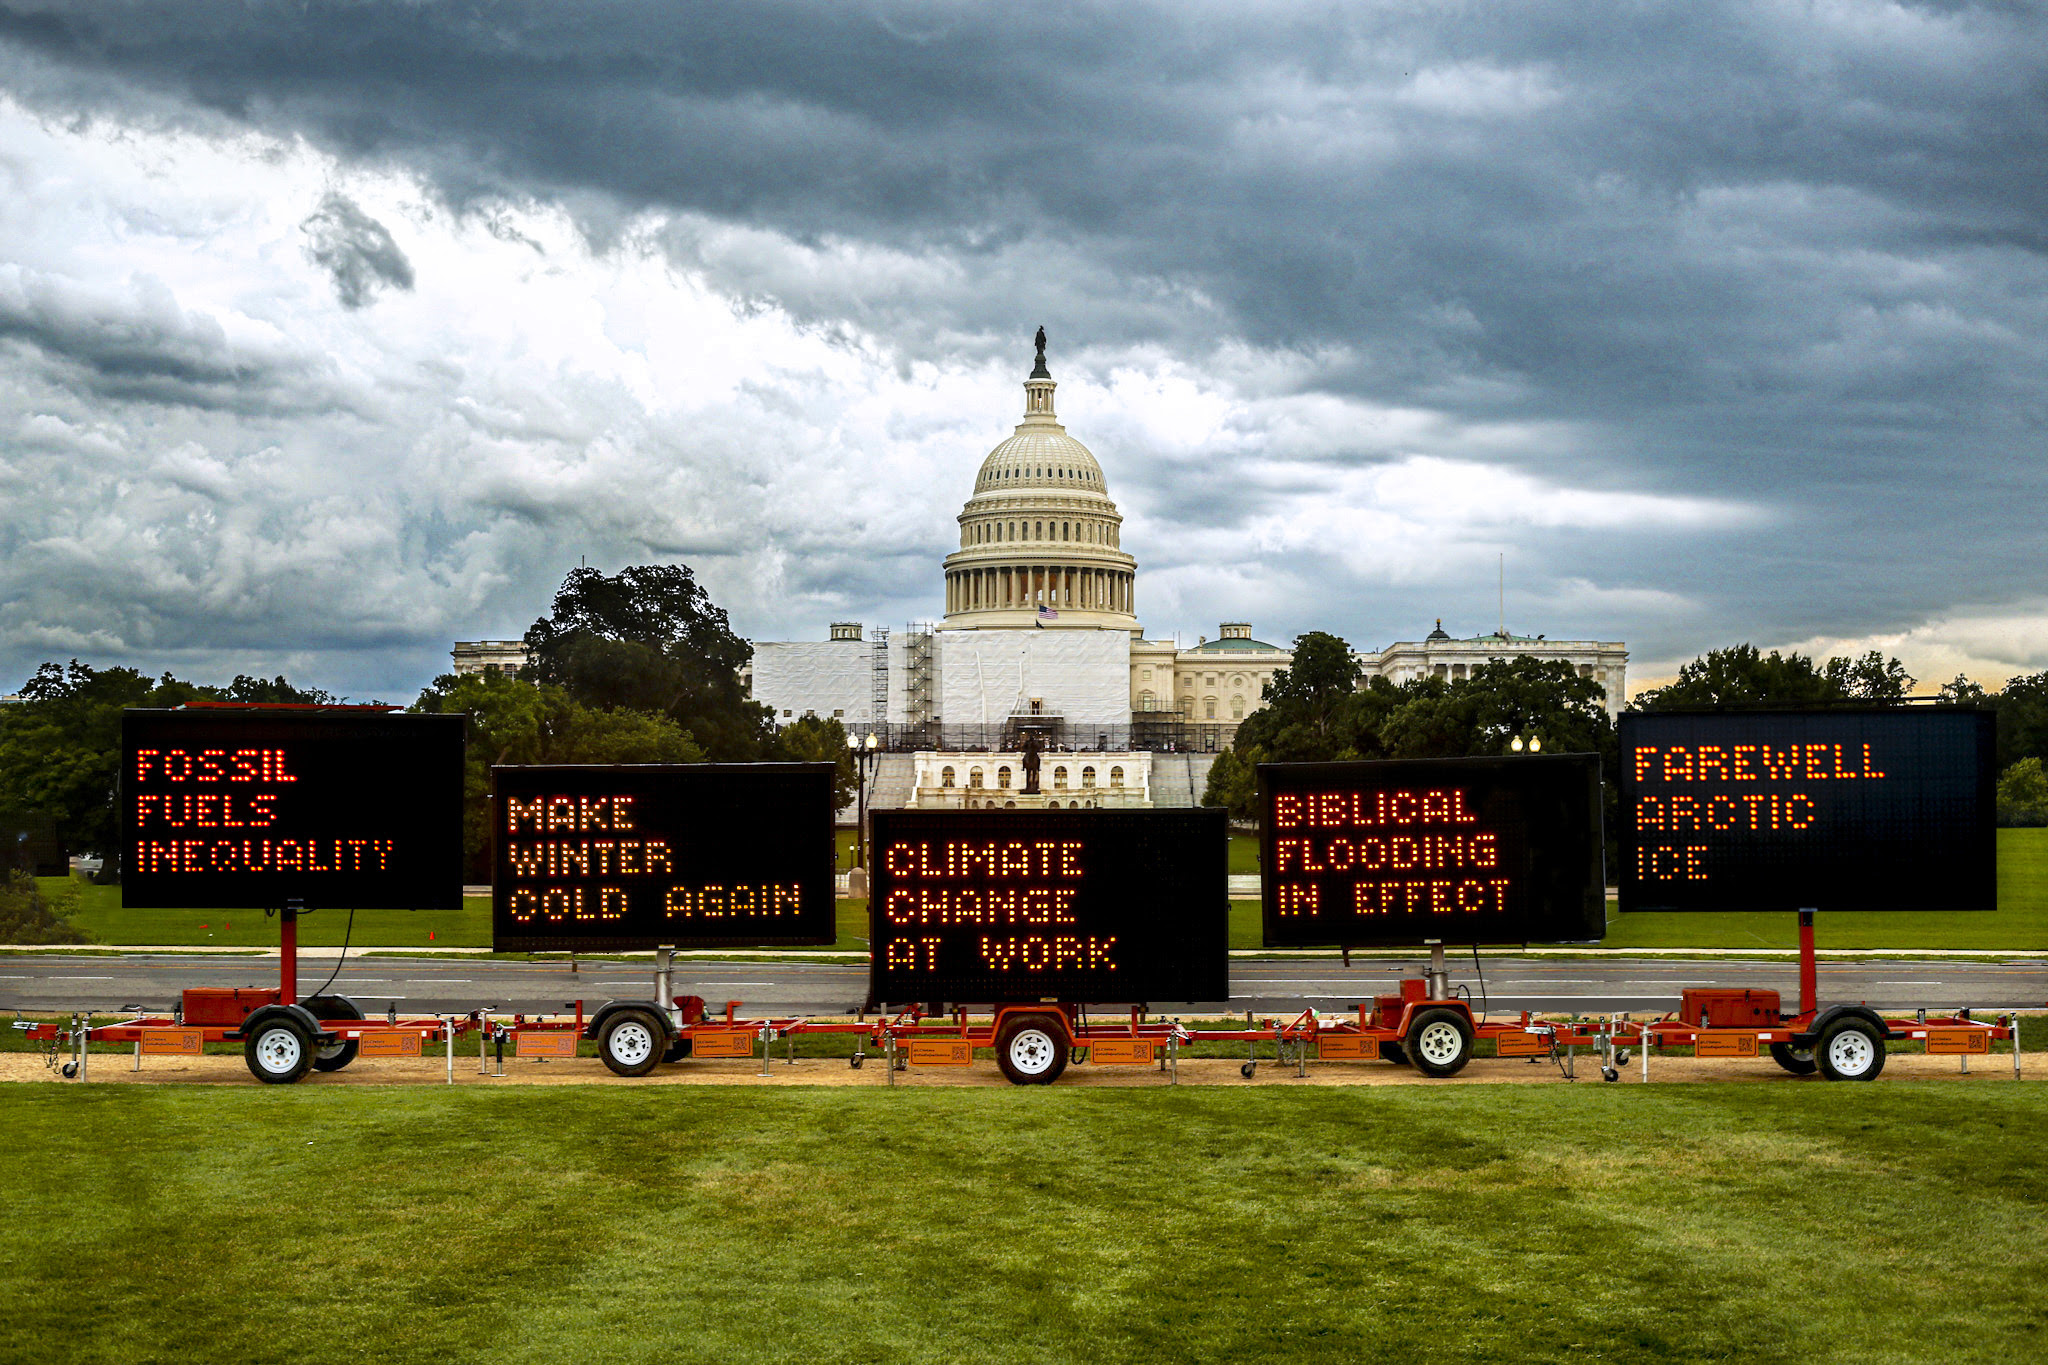 Solar-powered highway road signs on the National Mall urging people to engage on climate action.